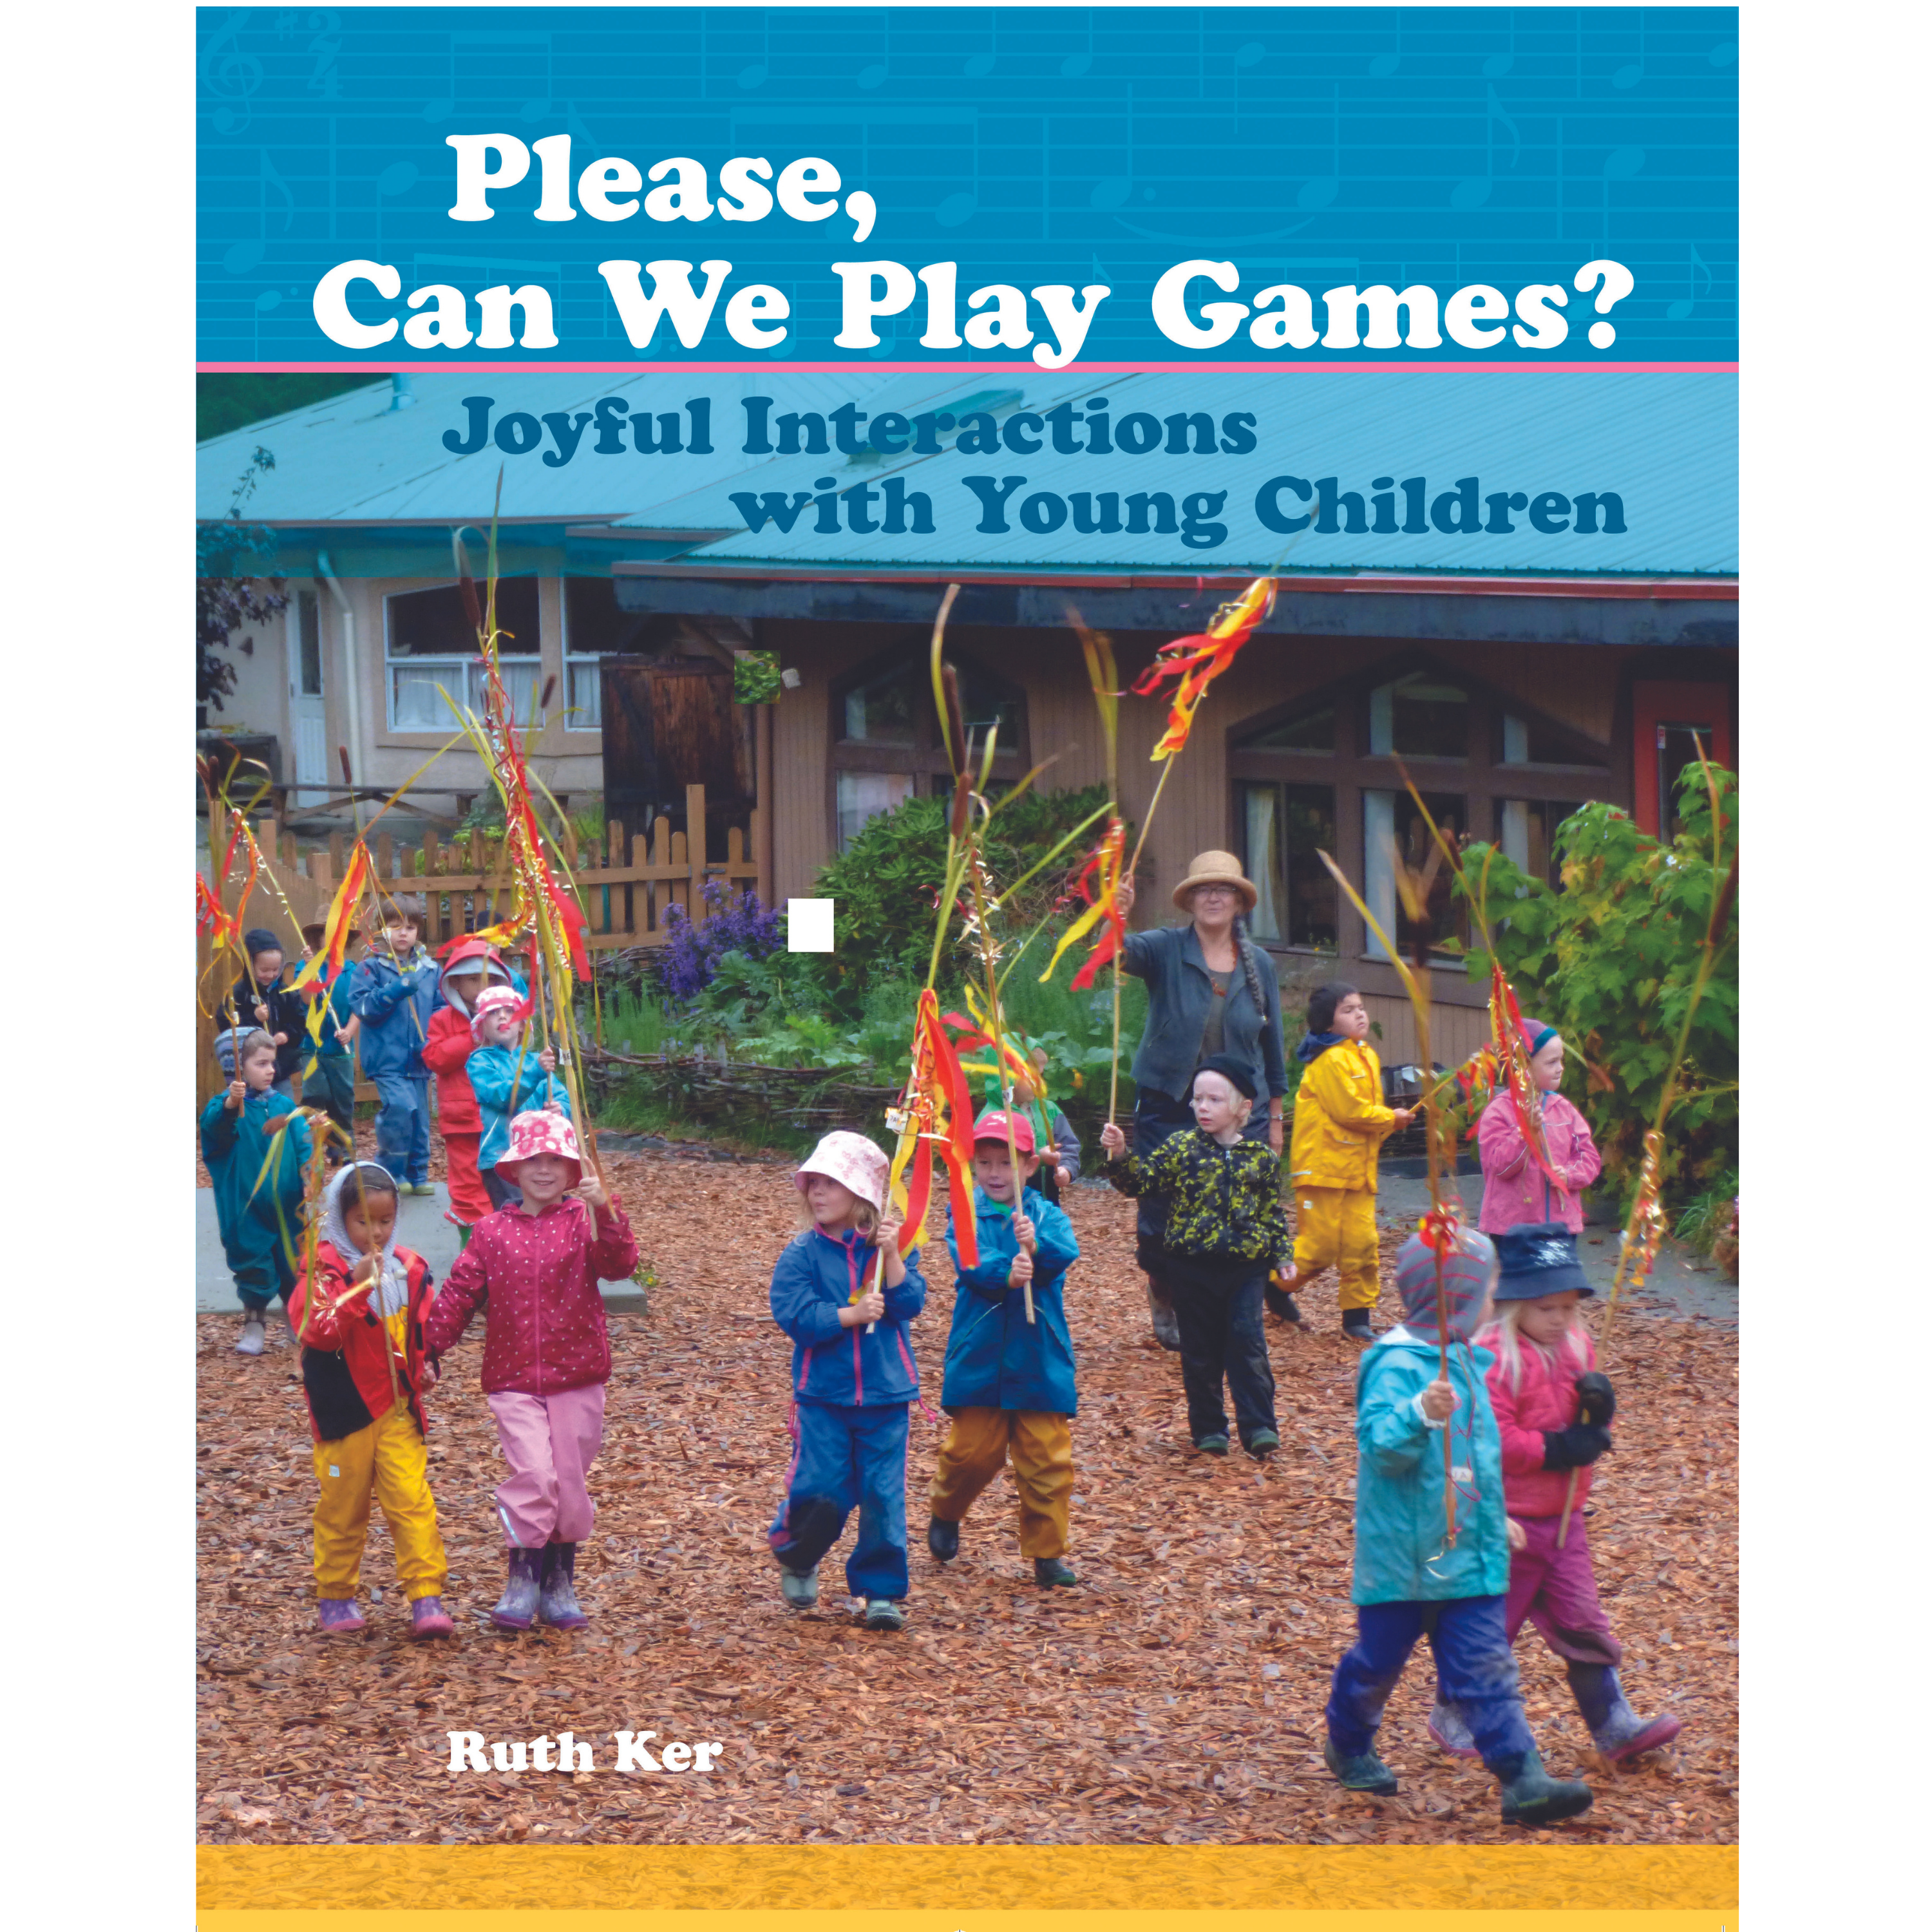 Please, Can We Play Games? Joyful Interactions with Young Children